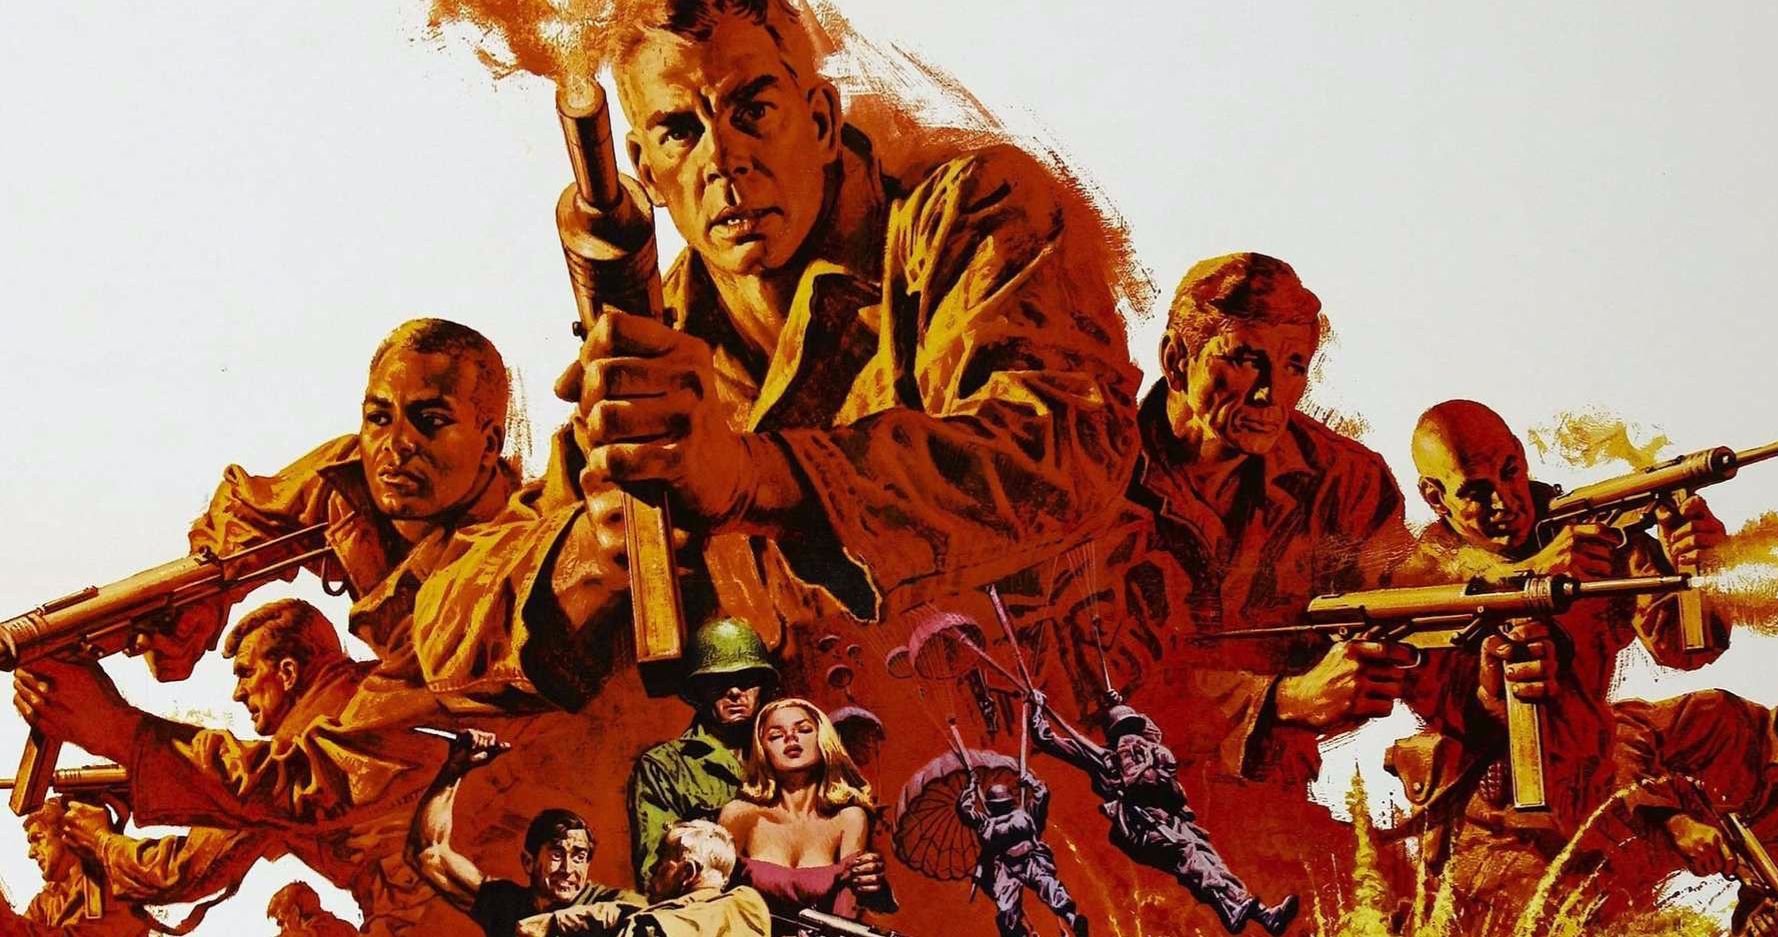 The Dirty Dozen Remake Gets Suicide Squad Director David Ayer